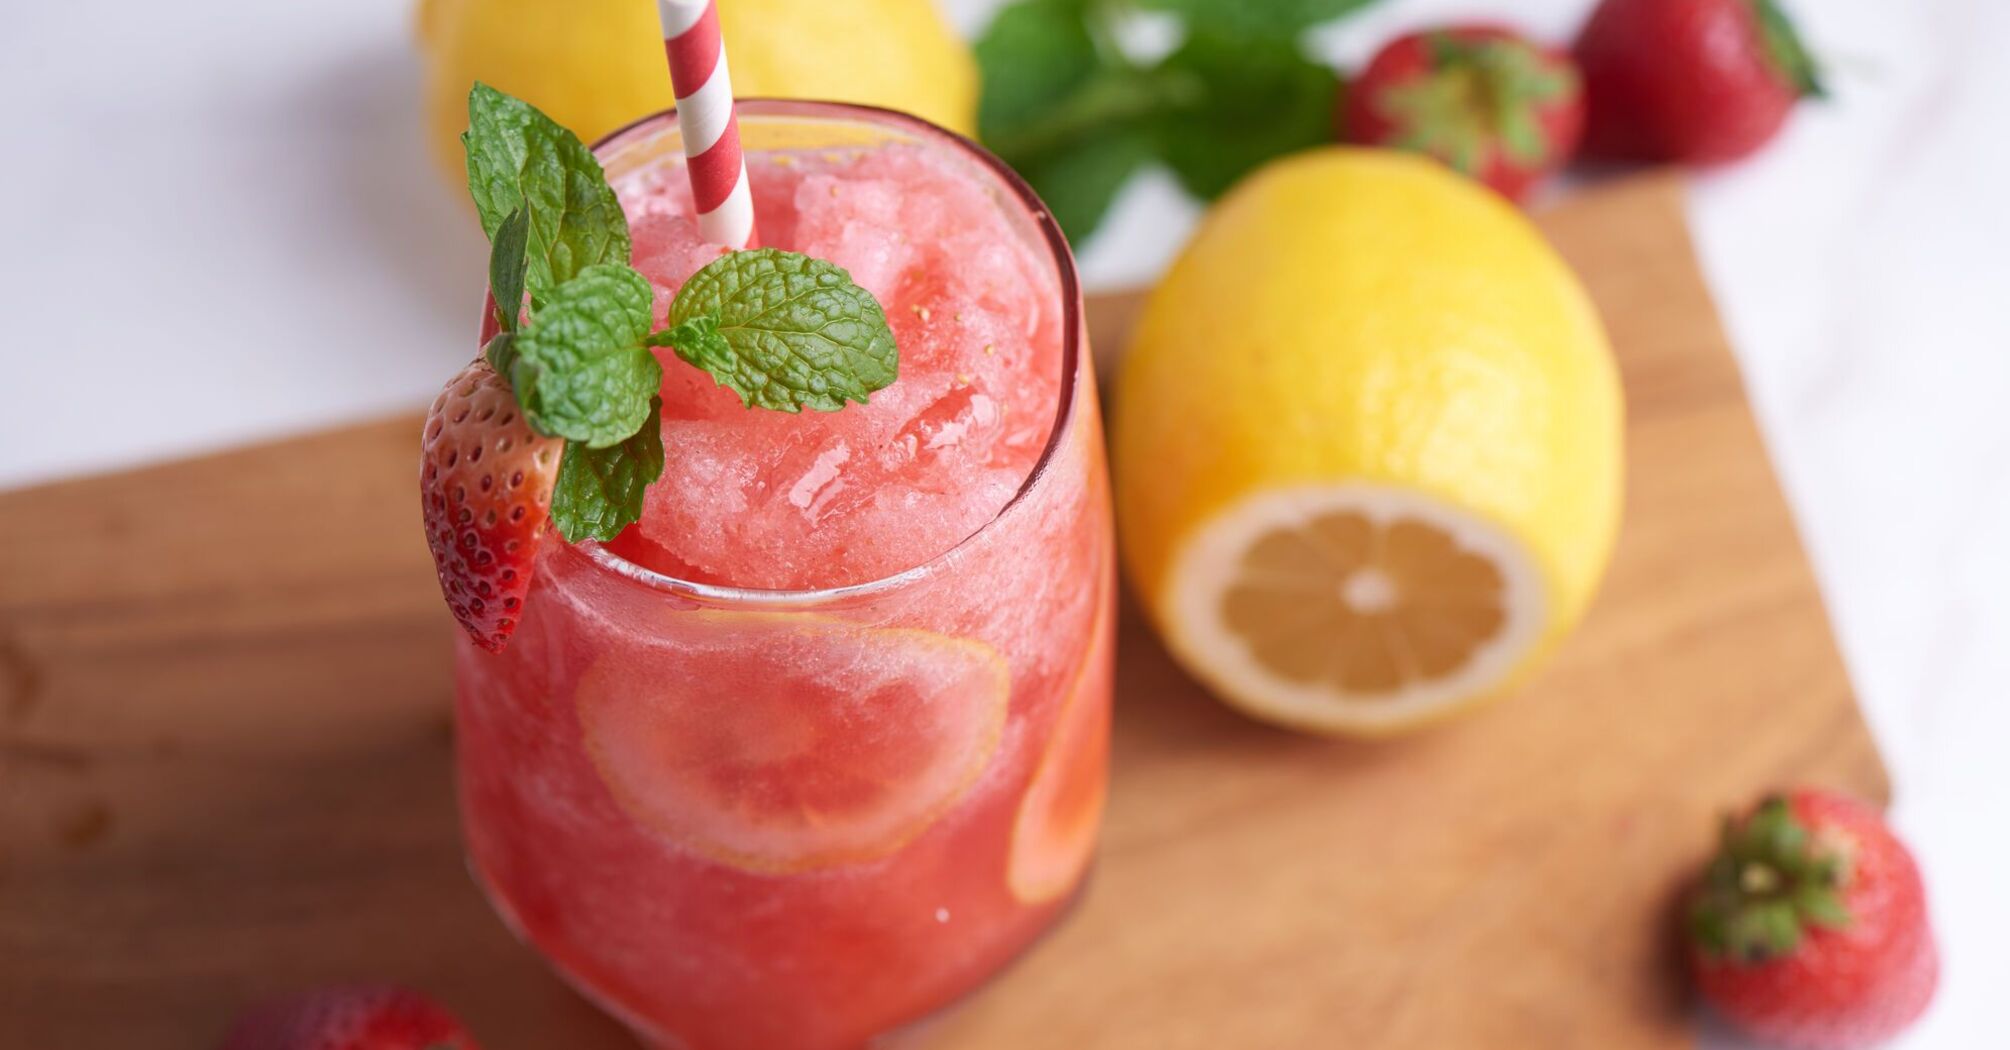 Strawberry lemonade: how to make a refreshing summer drink at home